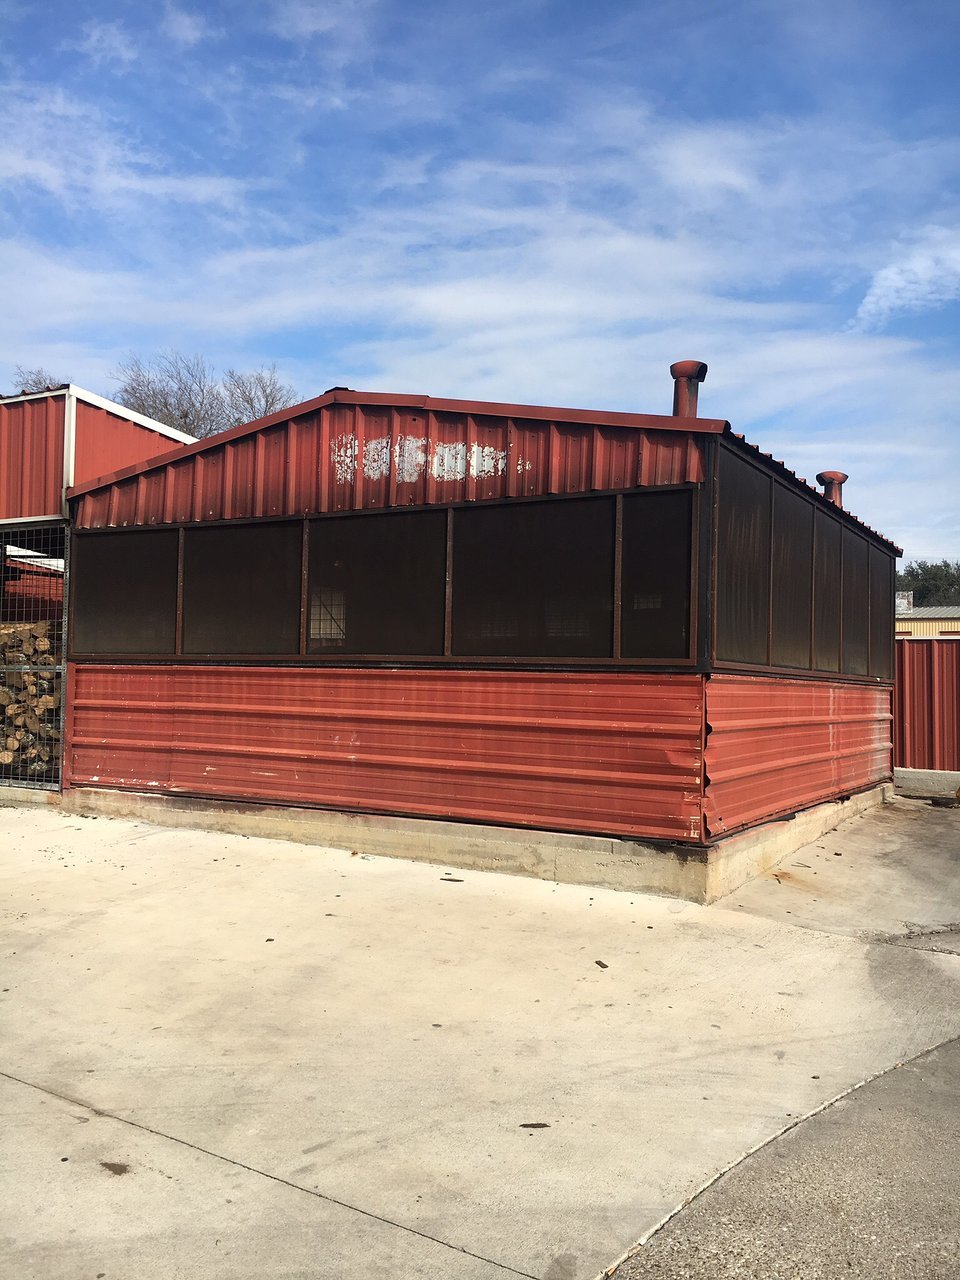 J & M Hill Country Barbeque